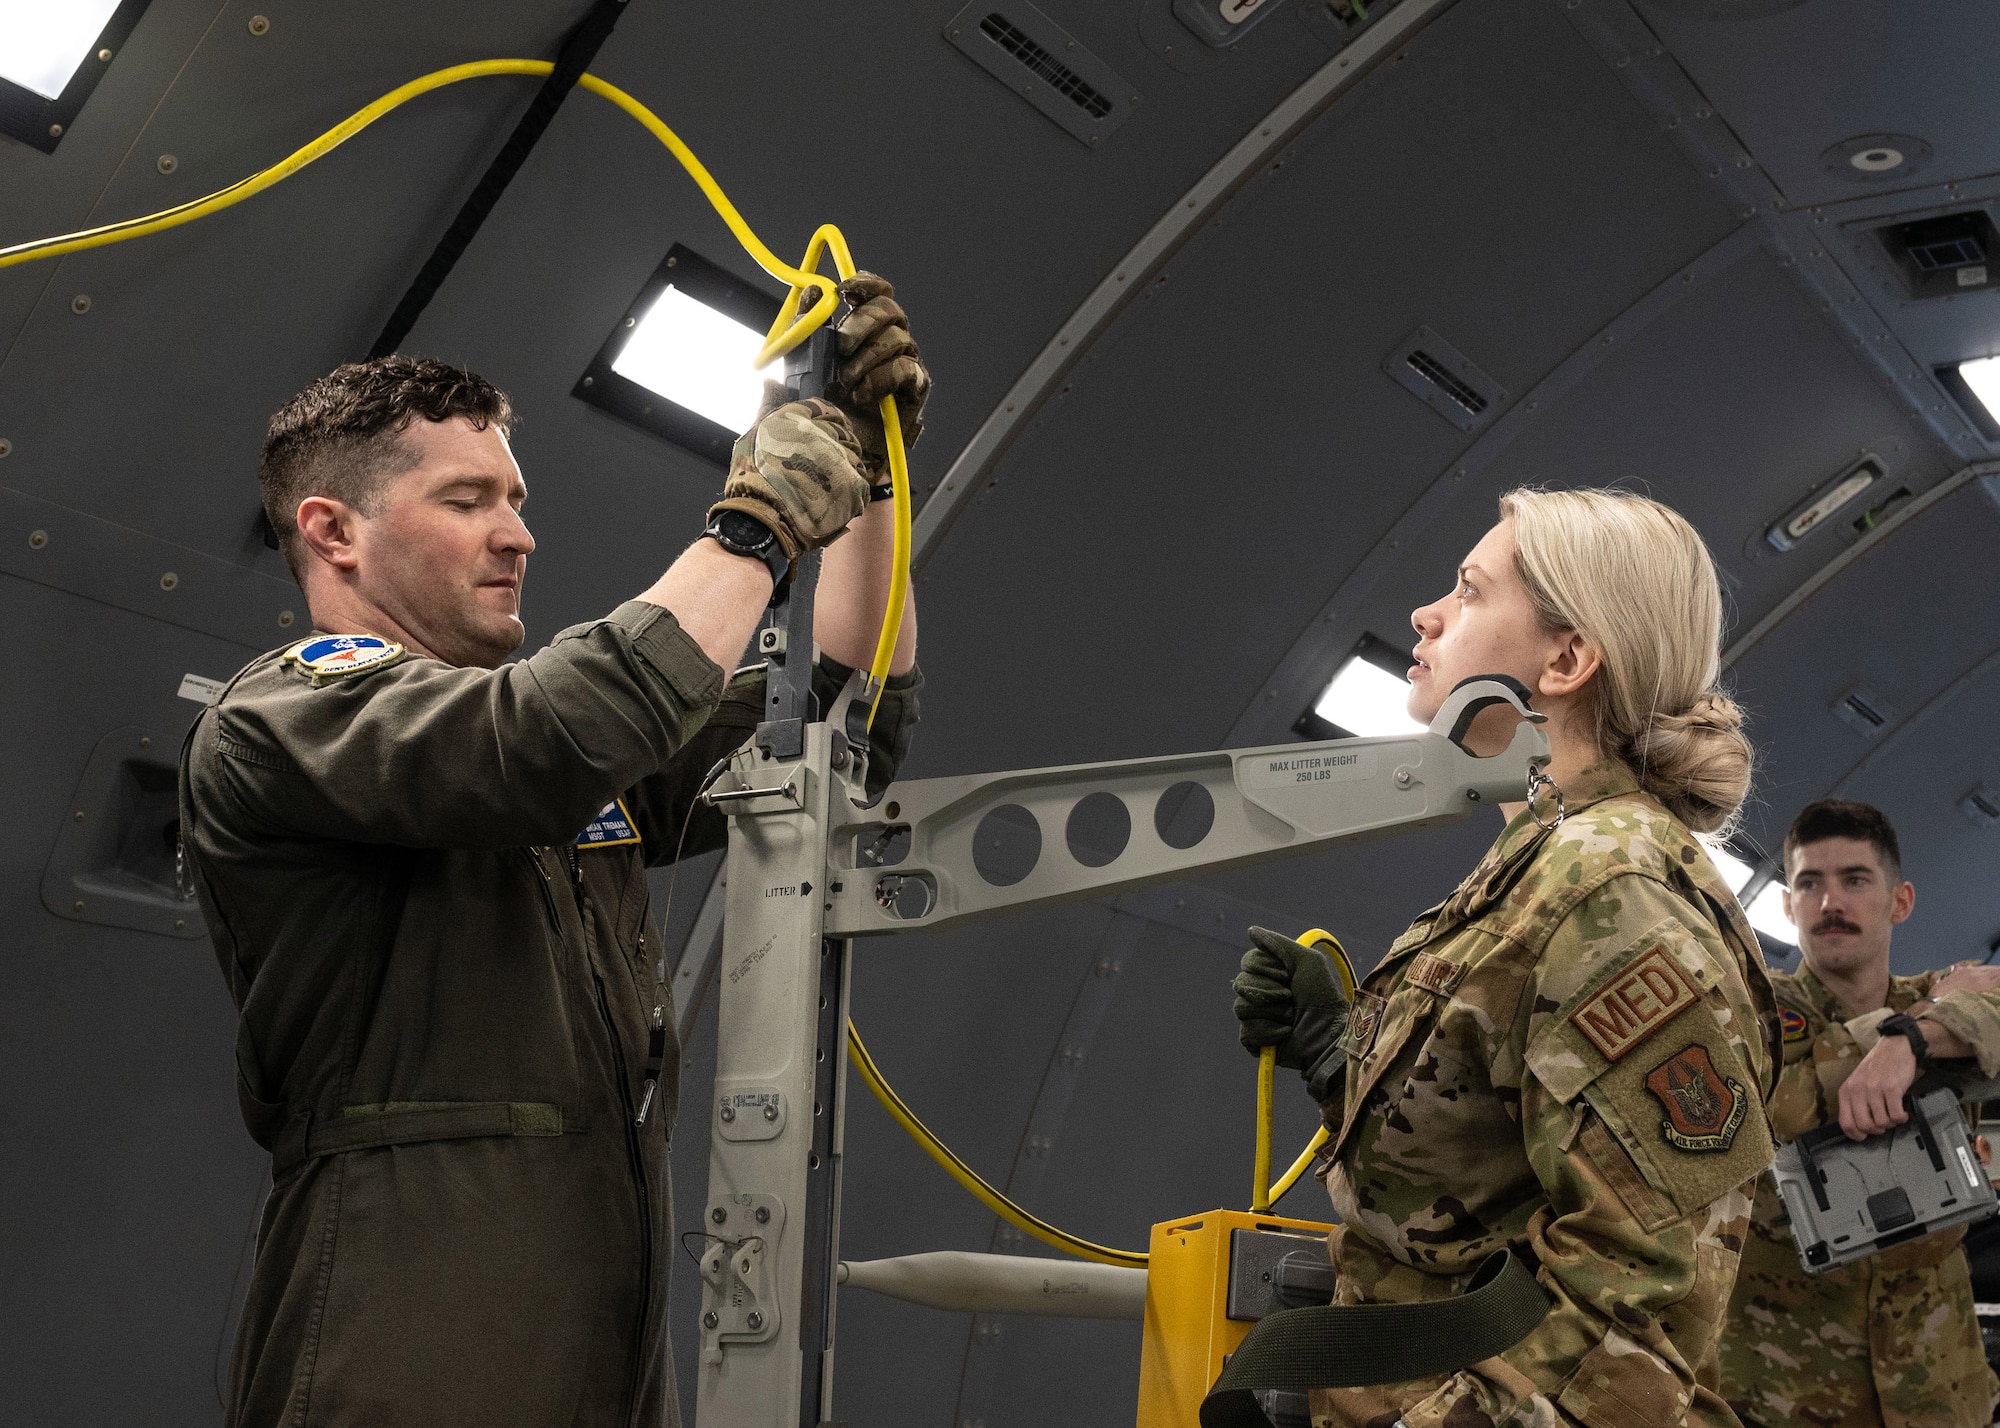 Master Sergeant Brian Tremain, a 934th Aeromedical Evacuation Squadron flight medical technician, left, and Staff Sgt. Samantha Fortman, 934 AES aeromedical evacuation technician, secure a line of oxygen inside a Boeing KC-46 Pegasus aircraft at the Minneapolis-St. Paul Air Reserve Station, Minnesota, March 23, 2023. Air crew members are responsible for setting up all medical equipment and structures within the plane before take-off. (U.S. Air Force photo by Senior Airman Victoriya Tarakanova)